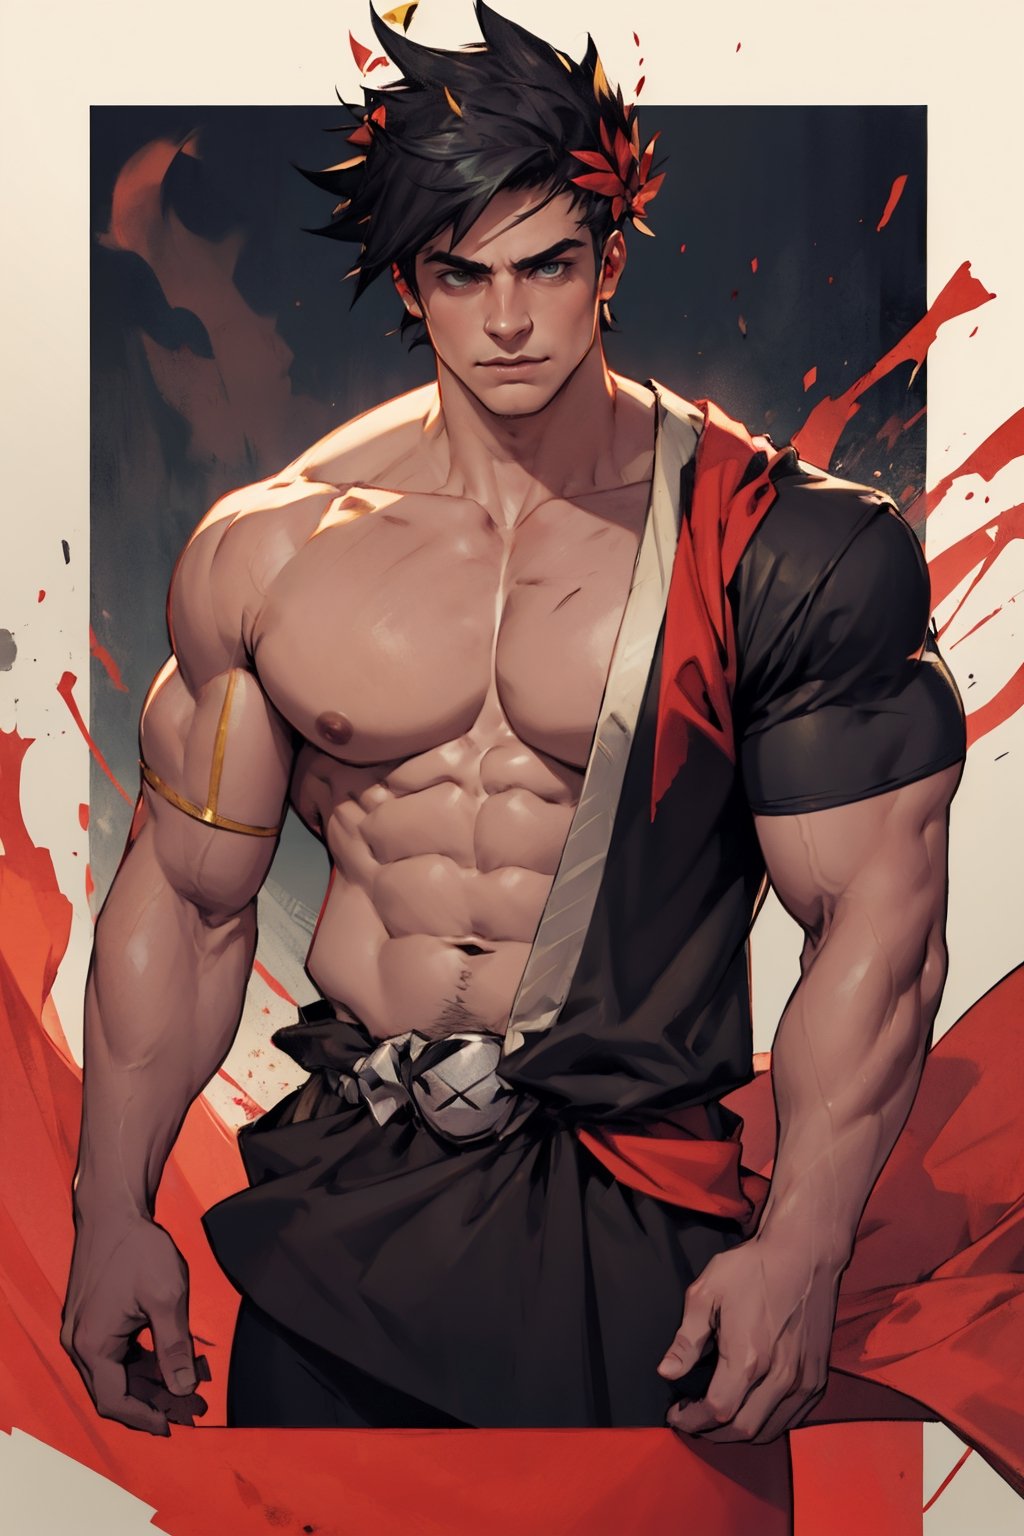 Zagreus with big muscular chest, arms and shoulders